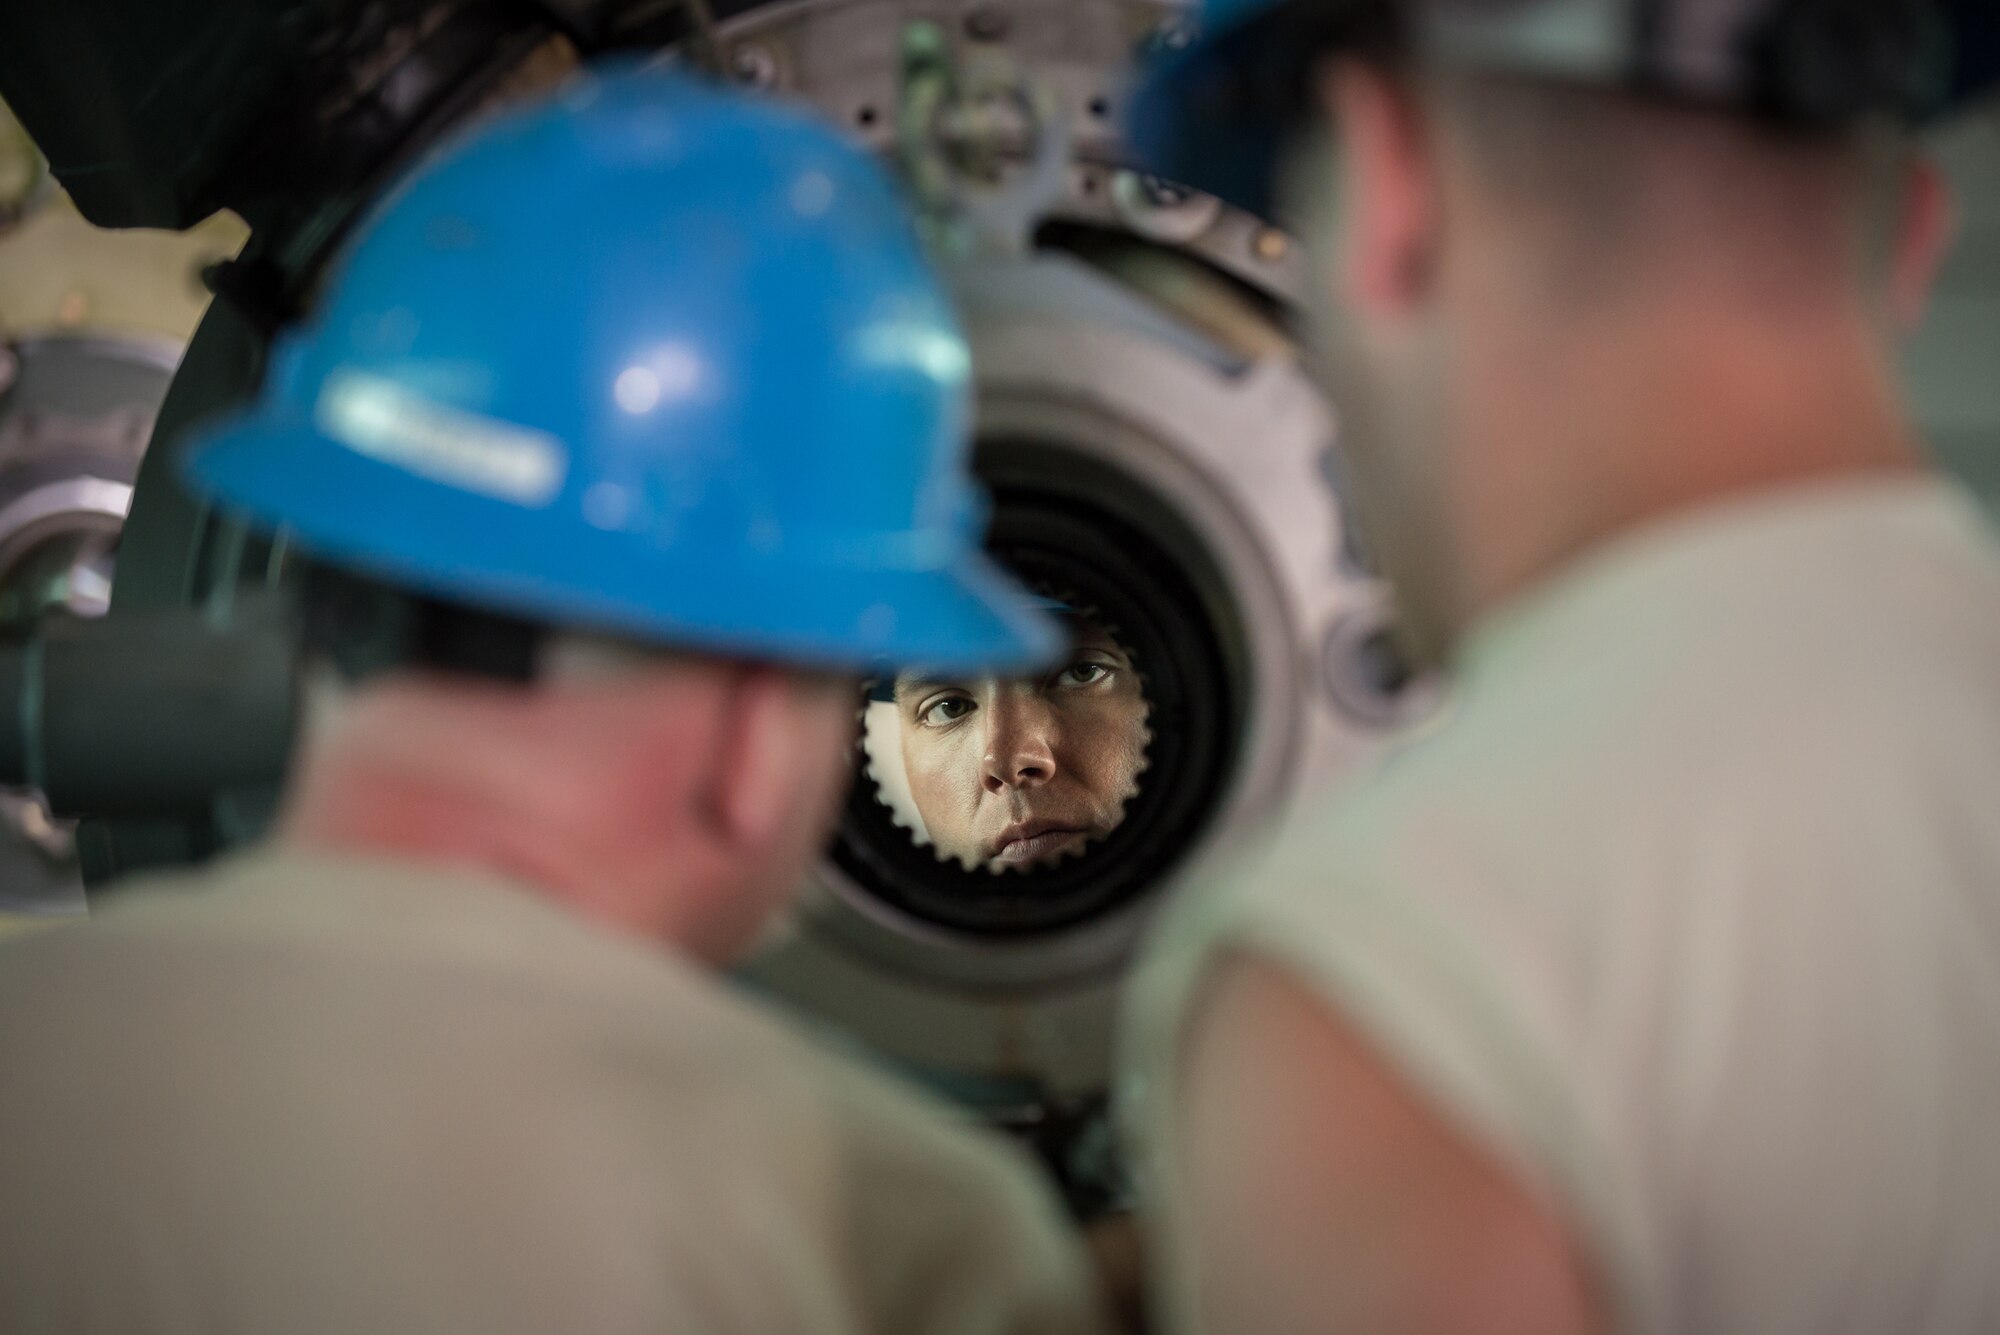 U.S. Air Force Staff Sgt. Dustin Harrison, a propulsion mechanic from the Kentucky Air National Guard’s 123rd Airlift Wing, inspects the hub of a C-130 propeller at the Air National Guard’s Air Dominance Center in Savannah, Ga., June 15, 2016. Harrison is attending Maintenance University here, a weeklong course designed to provide intensive instruction in aircraft maintenance. Now in its eighth year, Maintenance University is sponsored by the 123rd Airlift Wing. (U.S. Air National Guard photo by Lt. Col. Dale Greer)